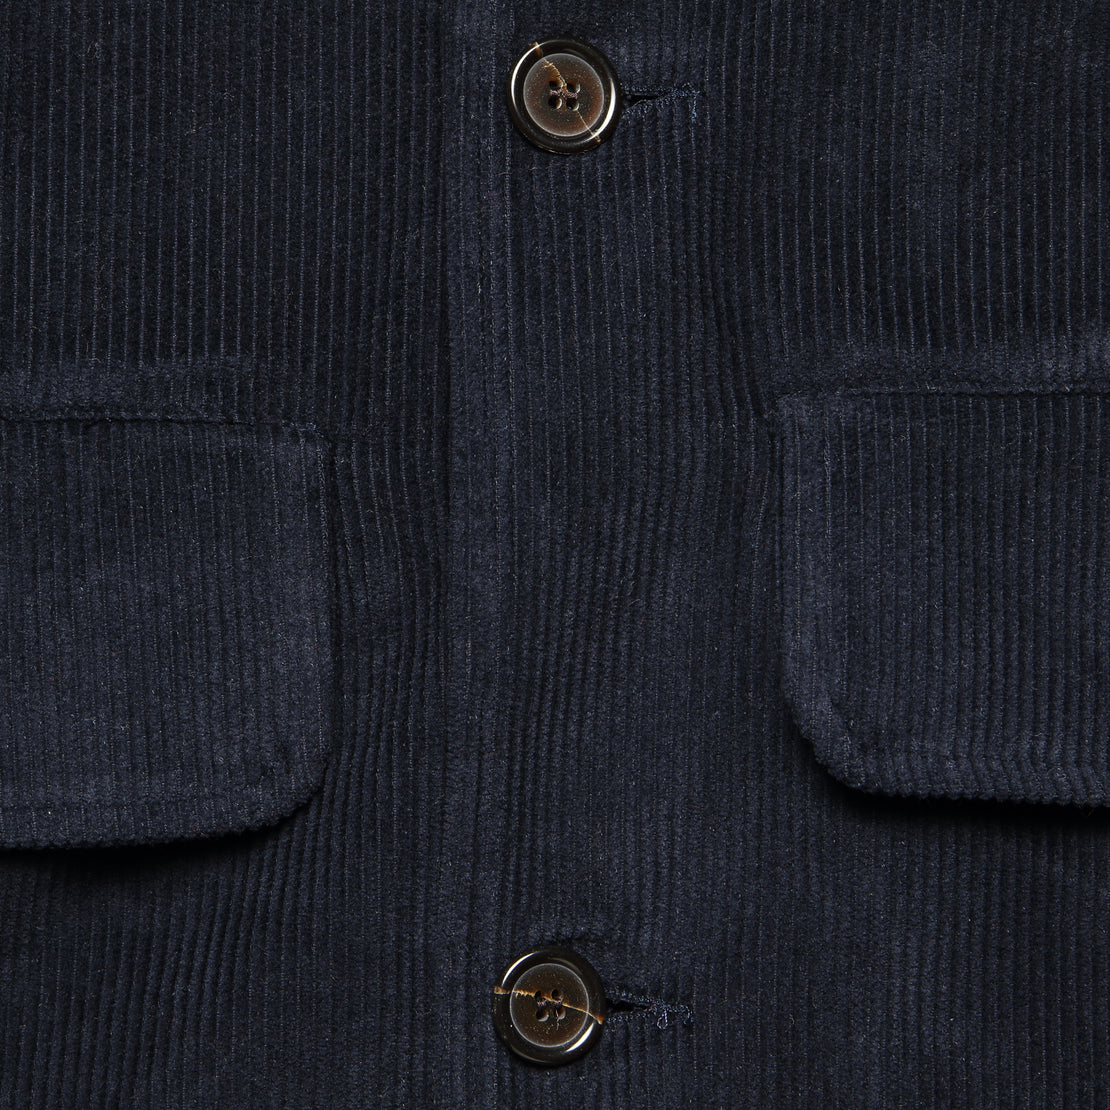 Warmus II Jacket - Navy Cord - Universal Works - STAG Provisions - Outerwear - Coat / Jacket